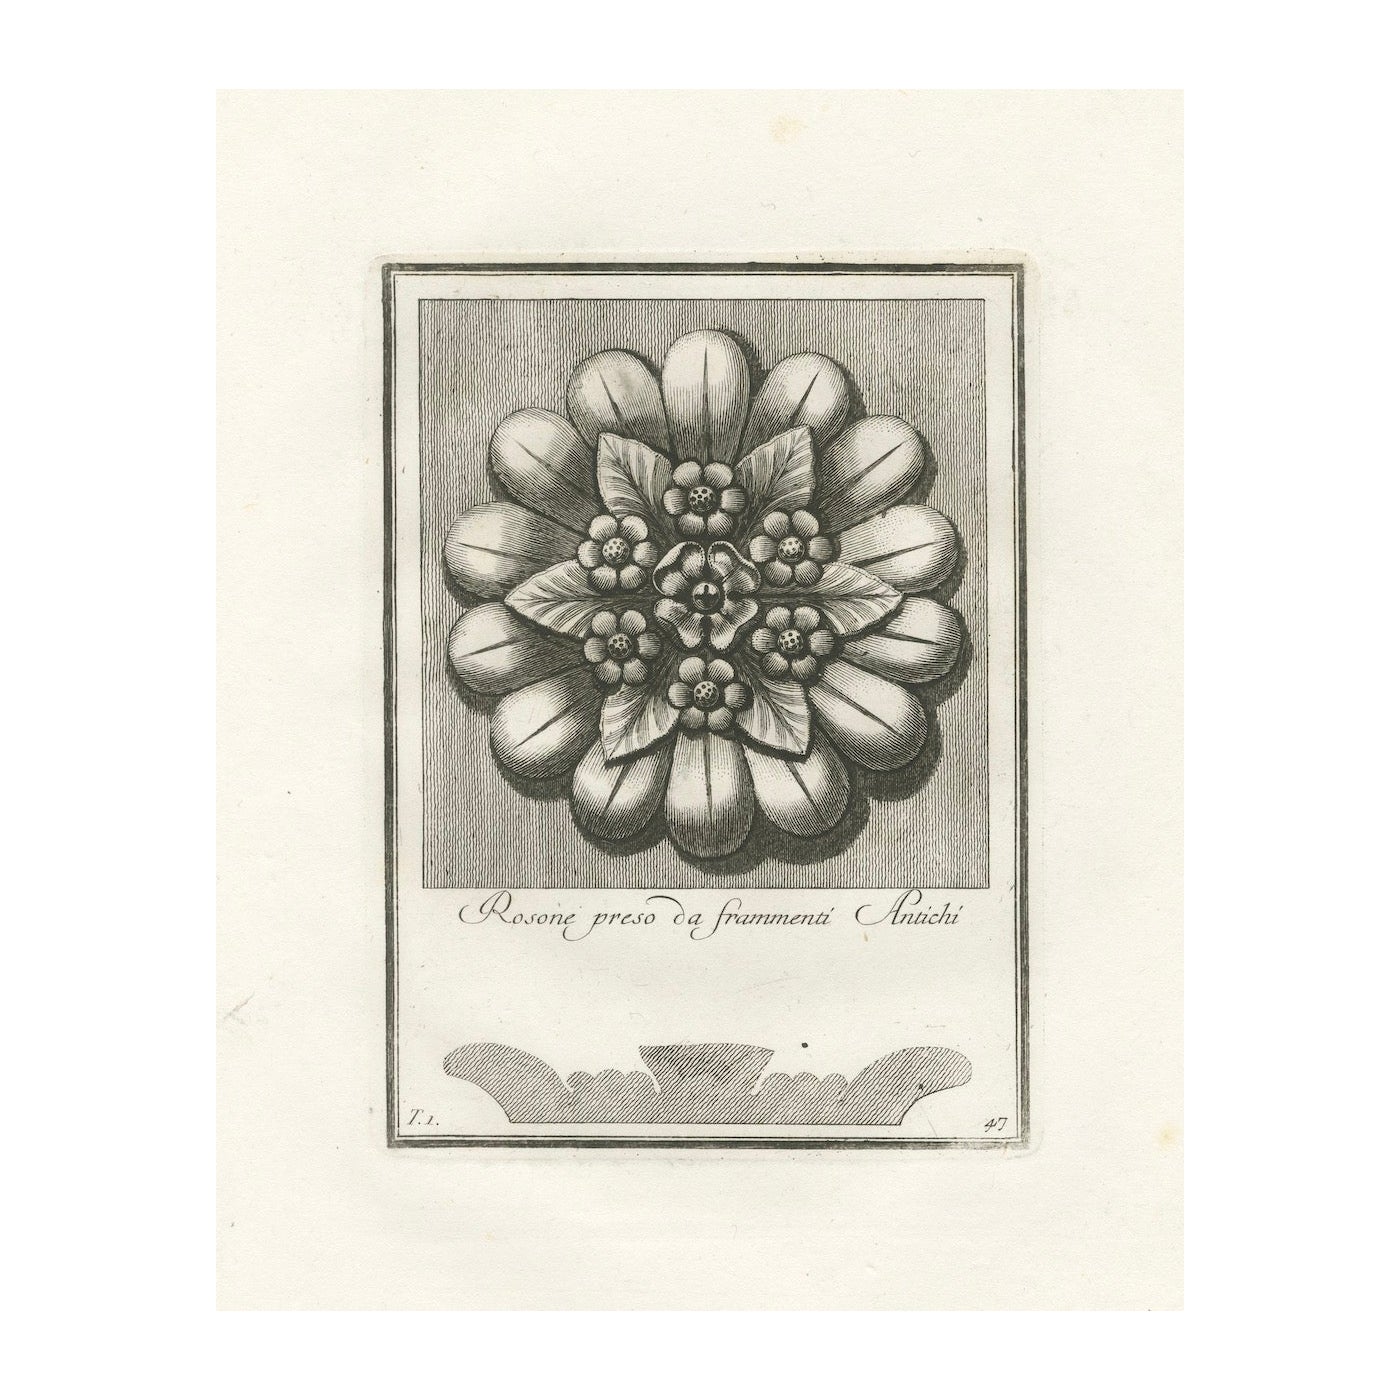 Floral Majesty: Rosette Plate 47 Engraved from Antiquity, circa 1780